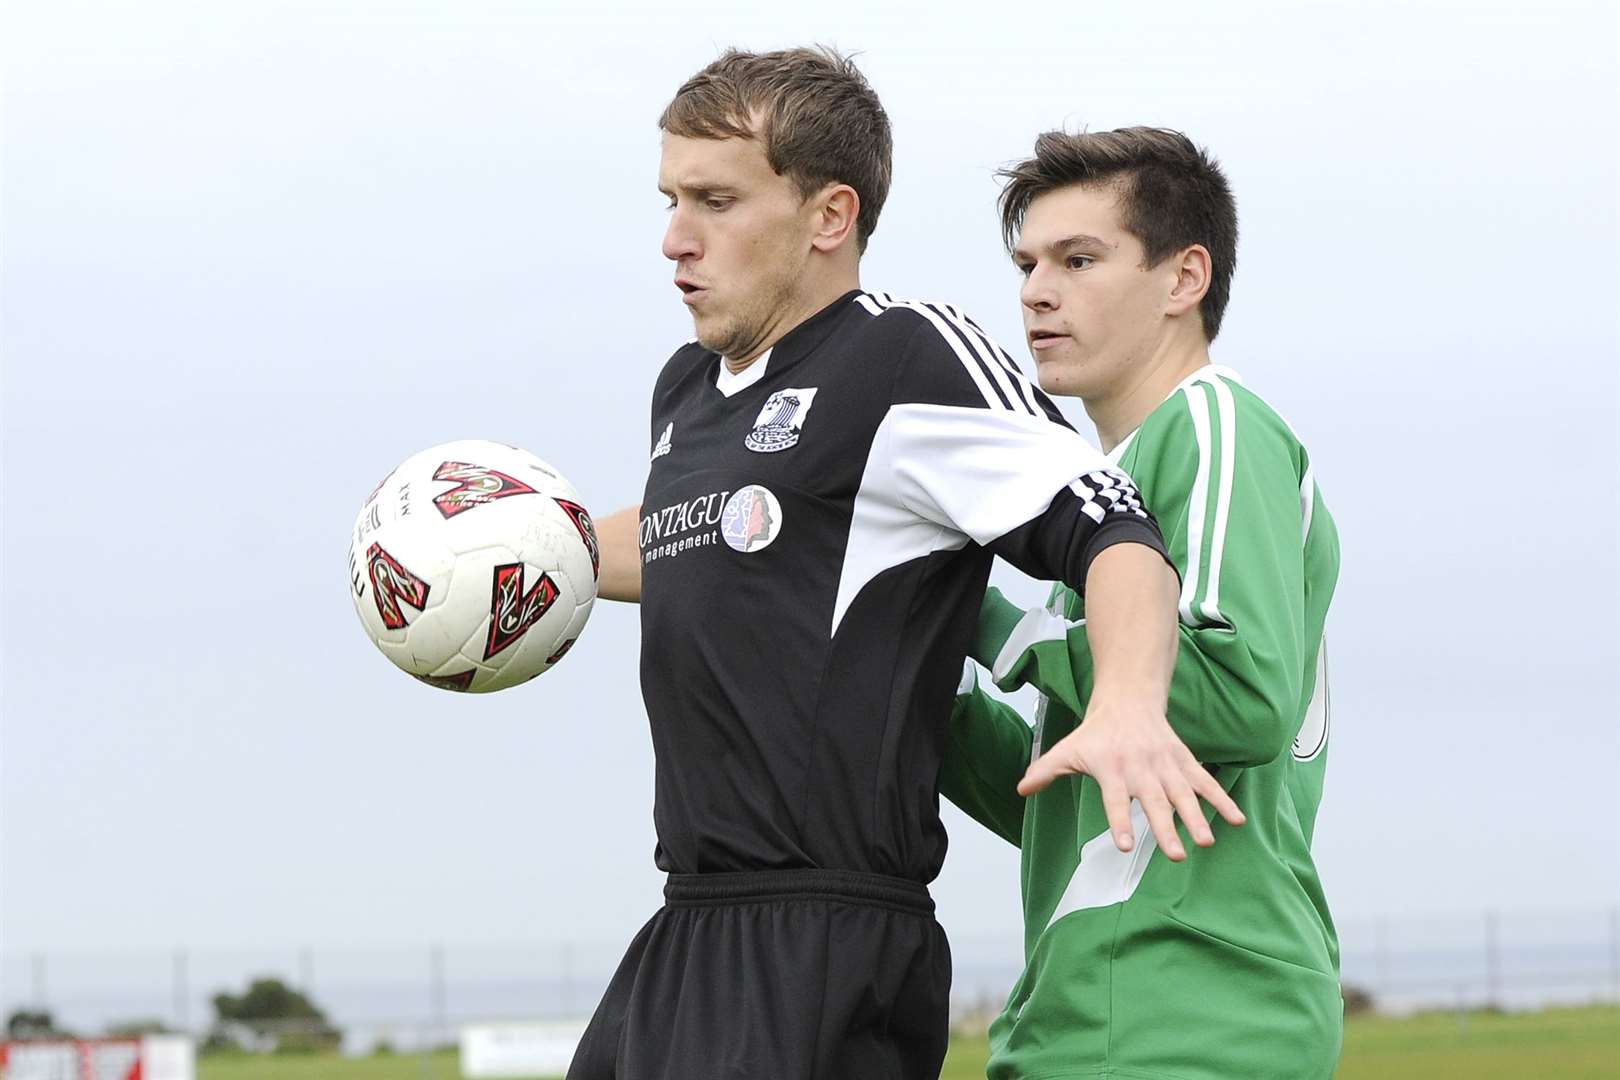 Burghead's Jared Kennedy, pictured right. Picture: Daniel Forsyth